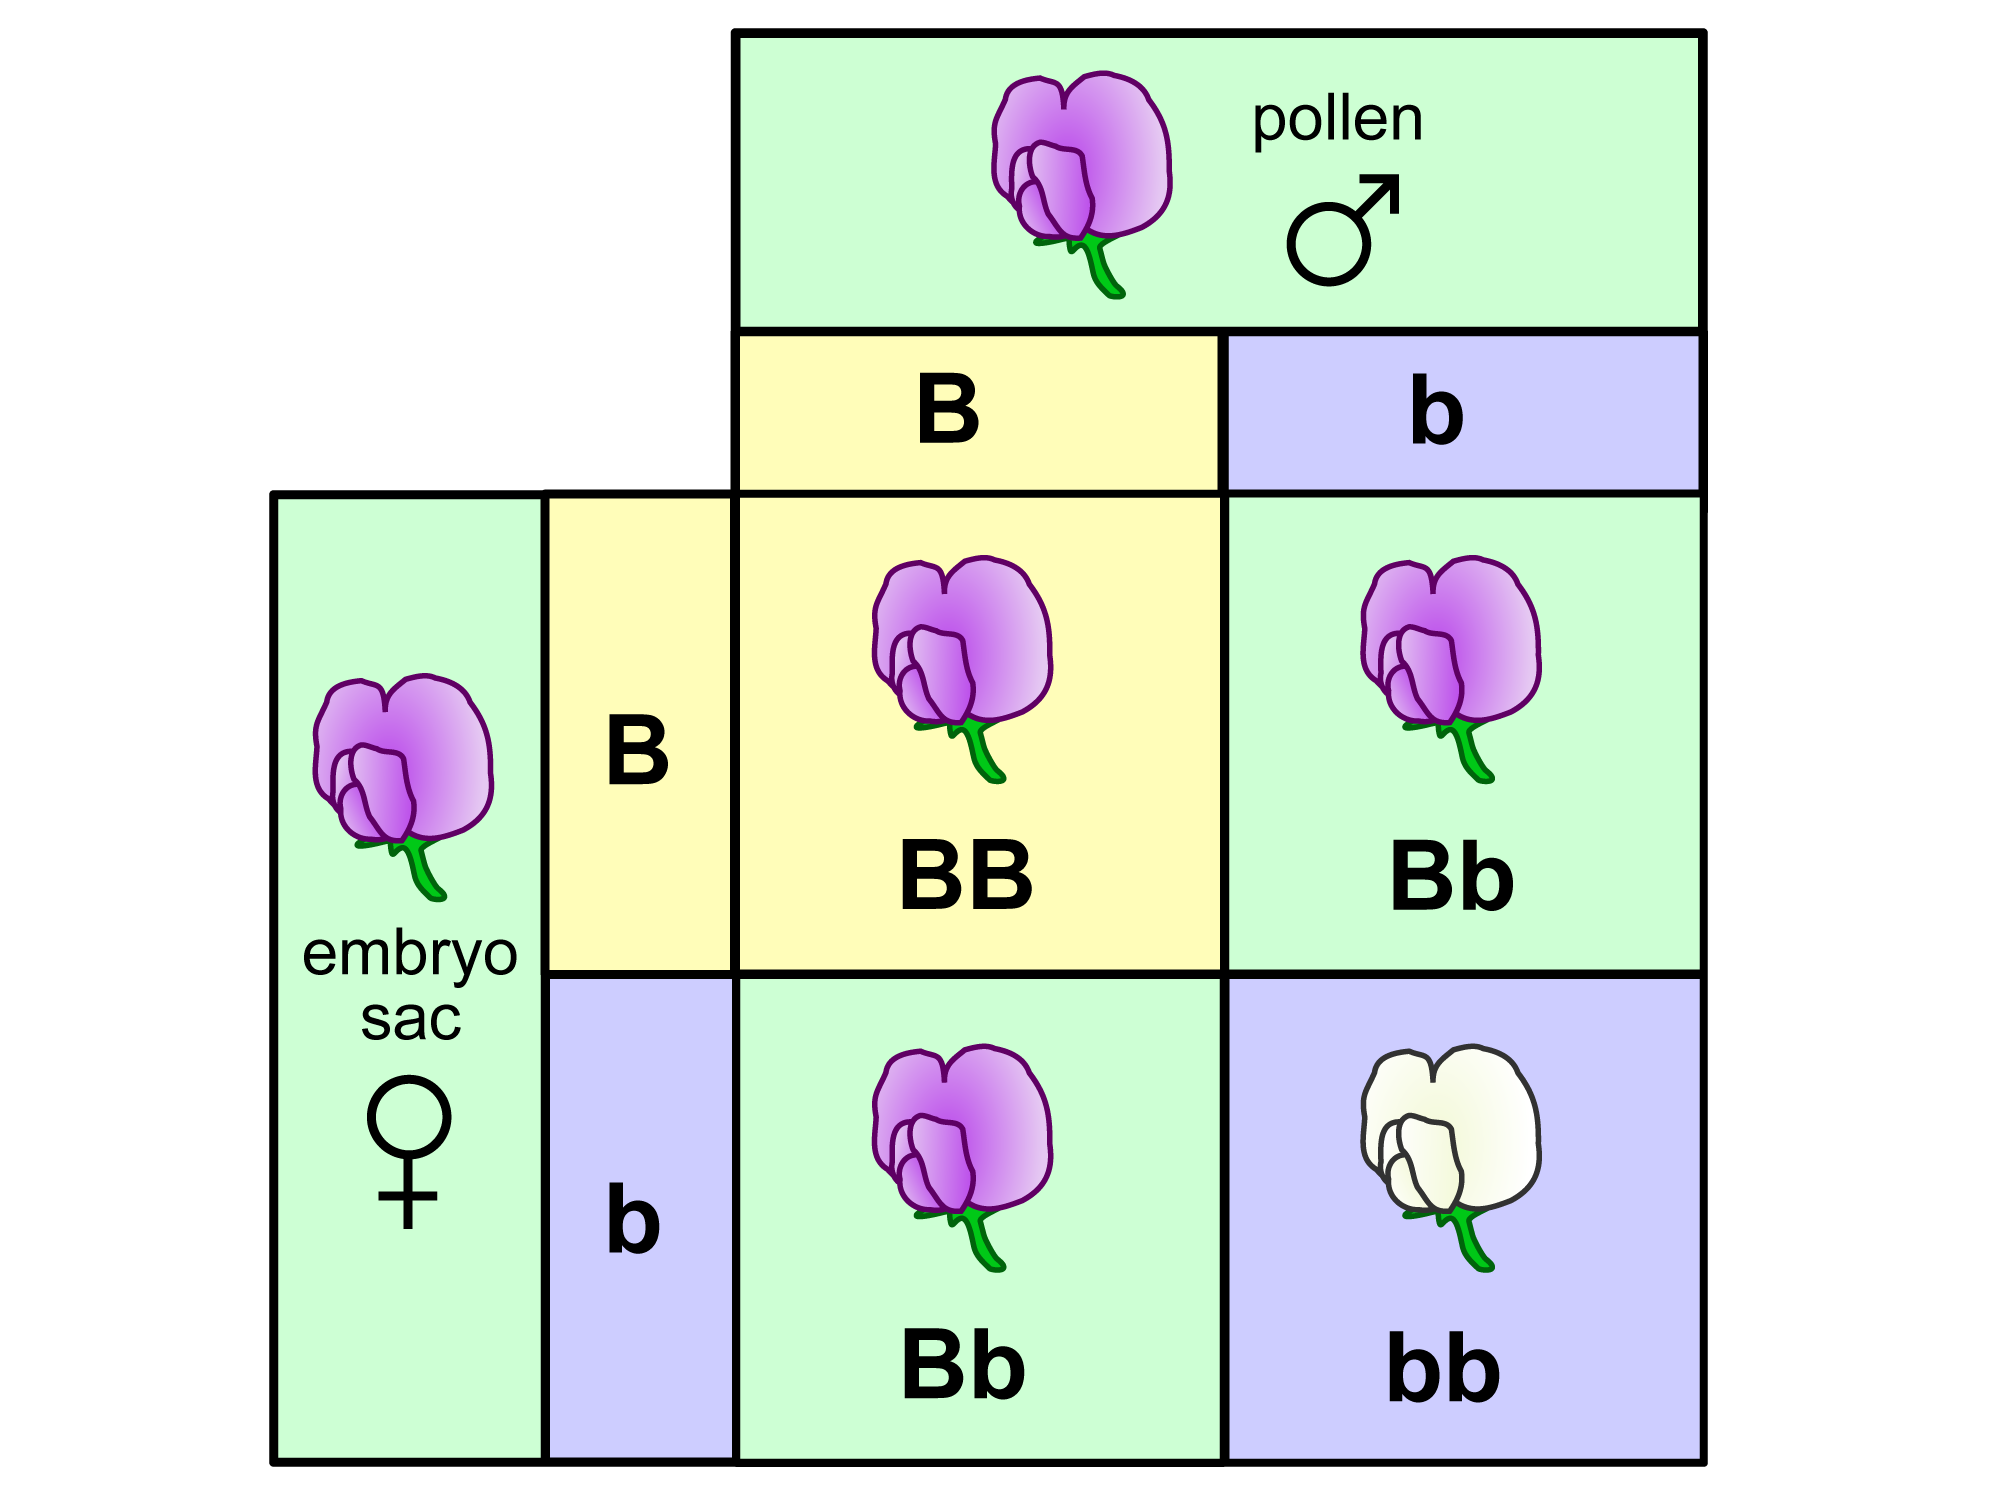 A diagram showing the inheritance of color in pea flowers. Each parent plant is heterozygous for flower color, with one dominant allele for pink flowers (B) and one recessive allele for white flowers (b). Flower color in the offspring is based on whether each inherits at least one dominant allele (pink flowers) or two recessive alleles (white flowers). The offspring include one plant with two dominant alleles (BB), two plants with one dominant and one recessive allele (Bb), and one plant with two recessive alleles (bb).